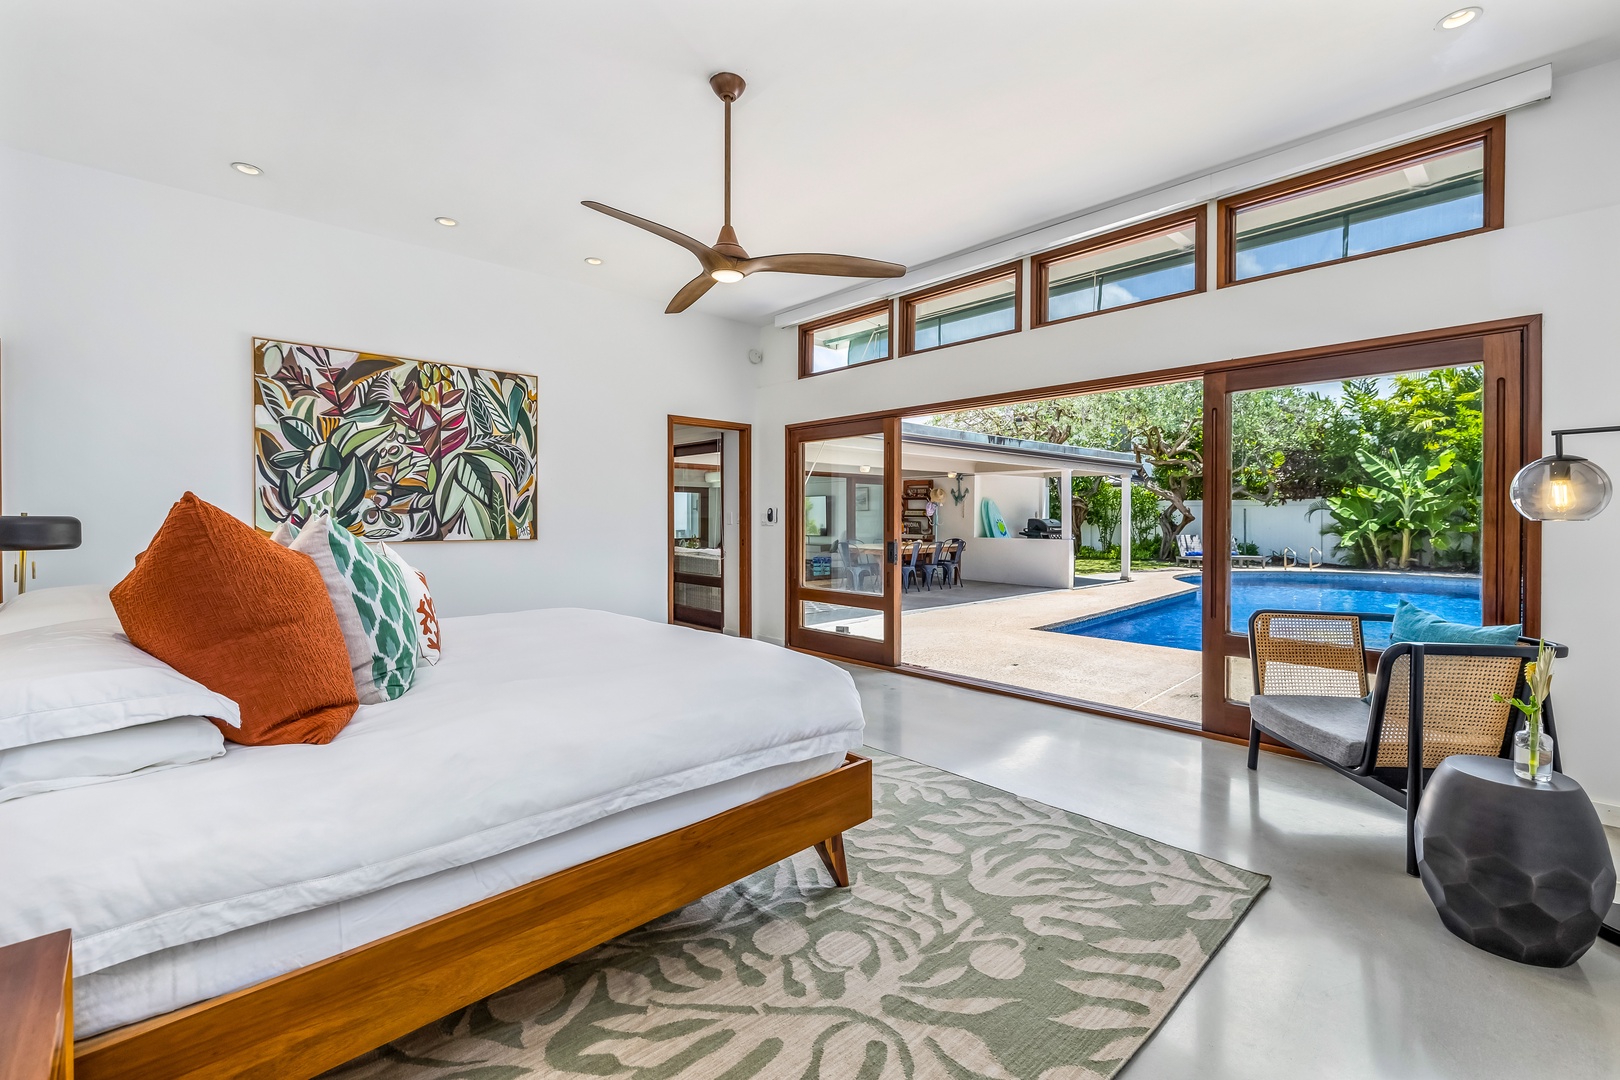 Kailua Vacation Rentals, Lokomaika'i Kailua - Primary bedroom with walk in closet and ensuite and pool views!